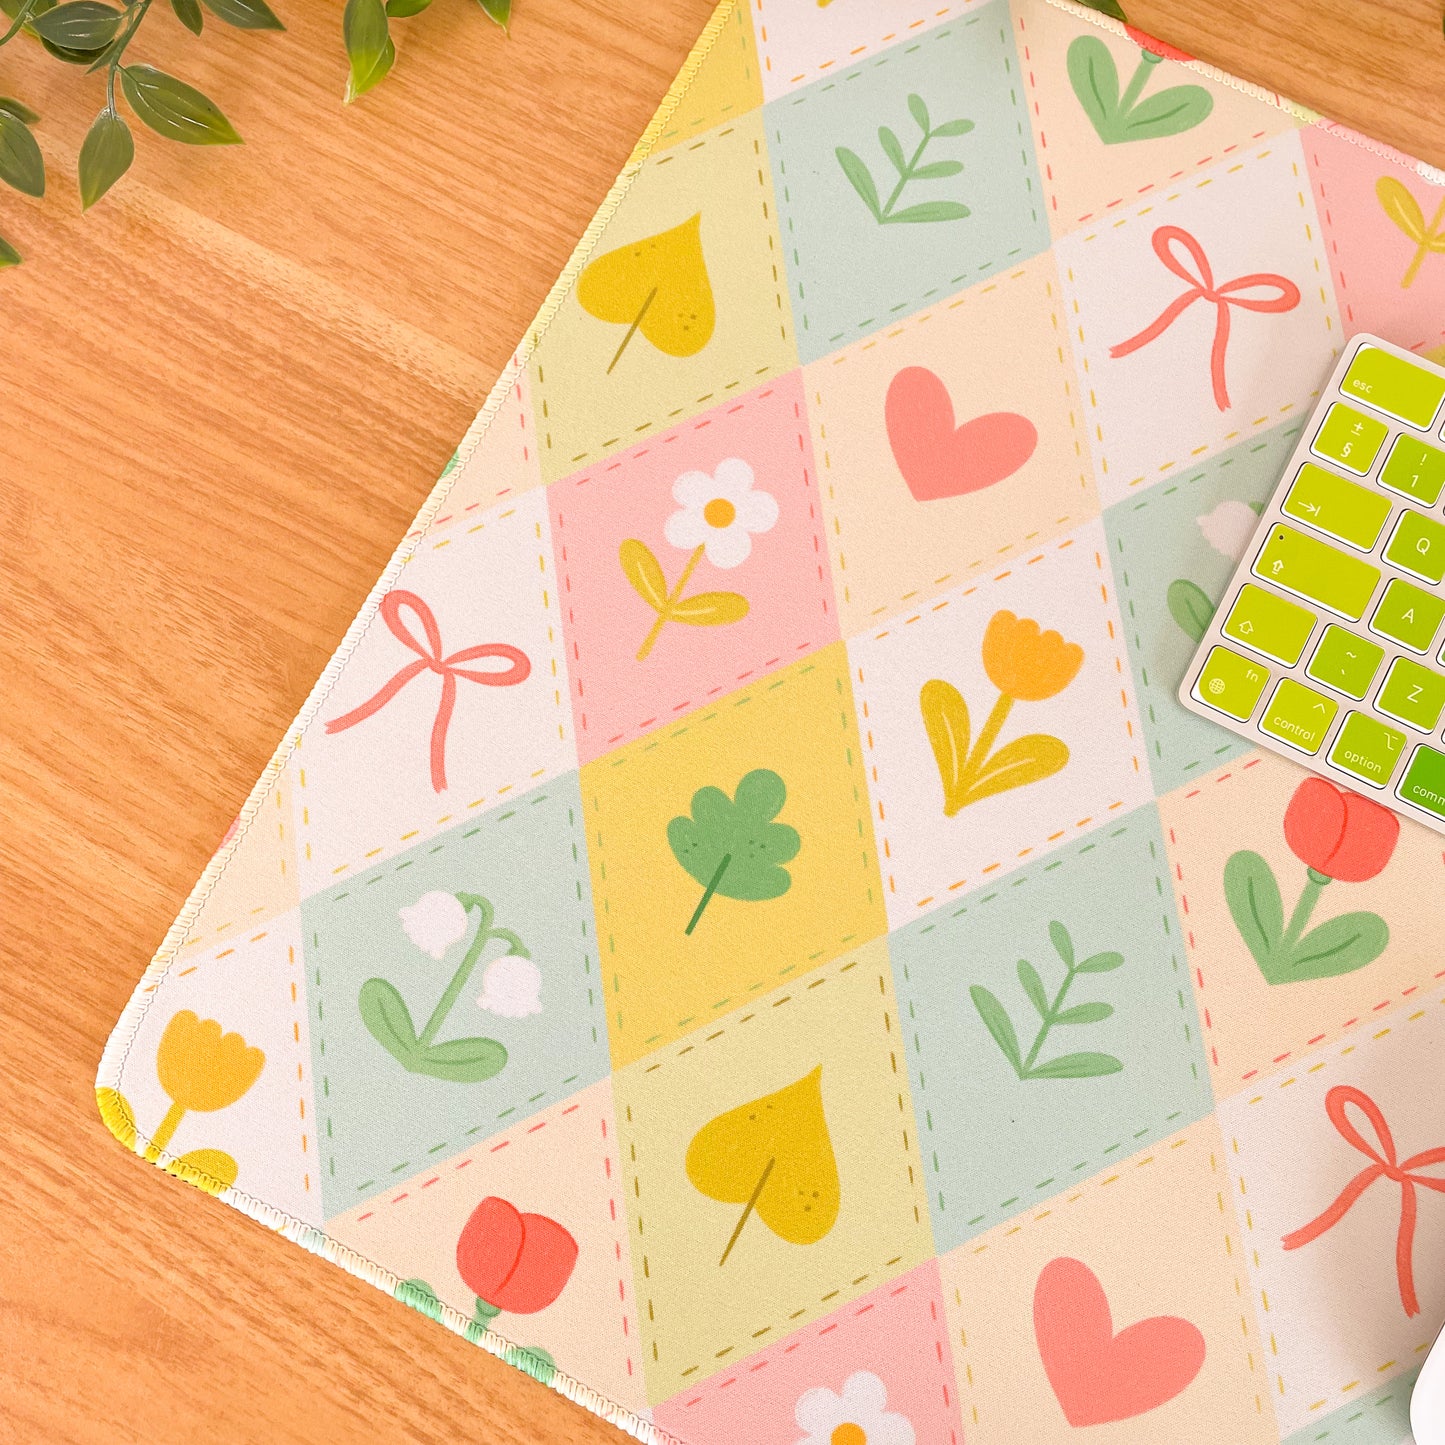 Spring Floral Quilt - Large Gaming Mouse Mat